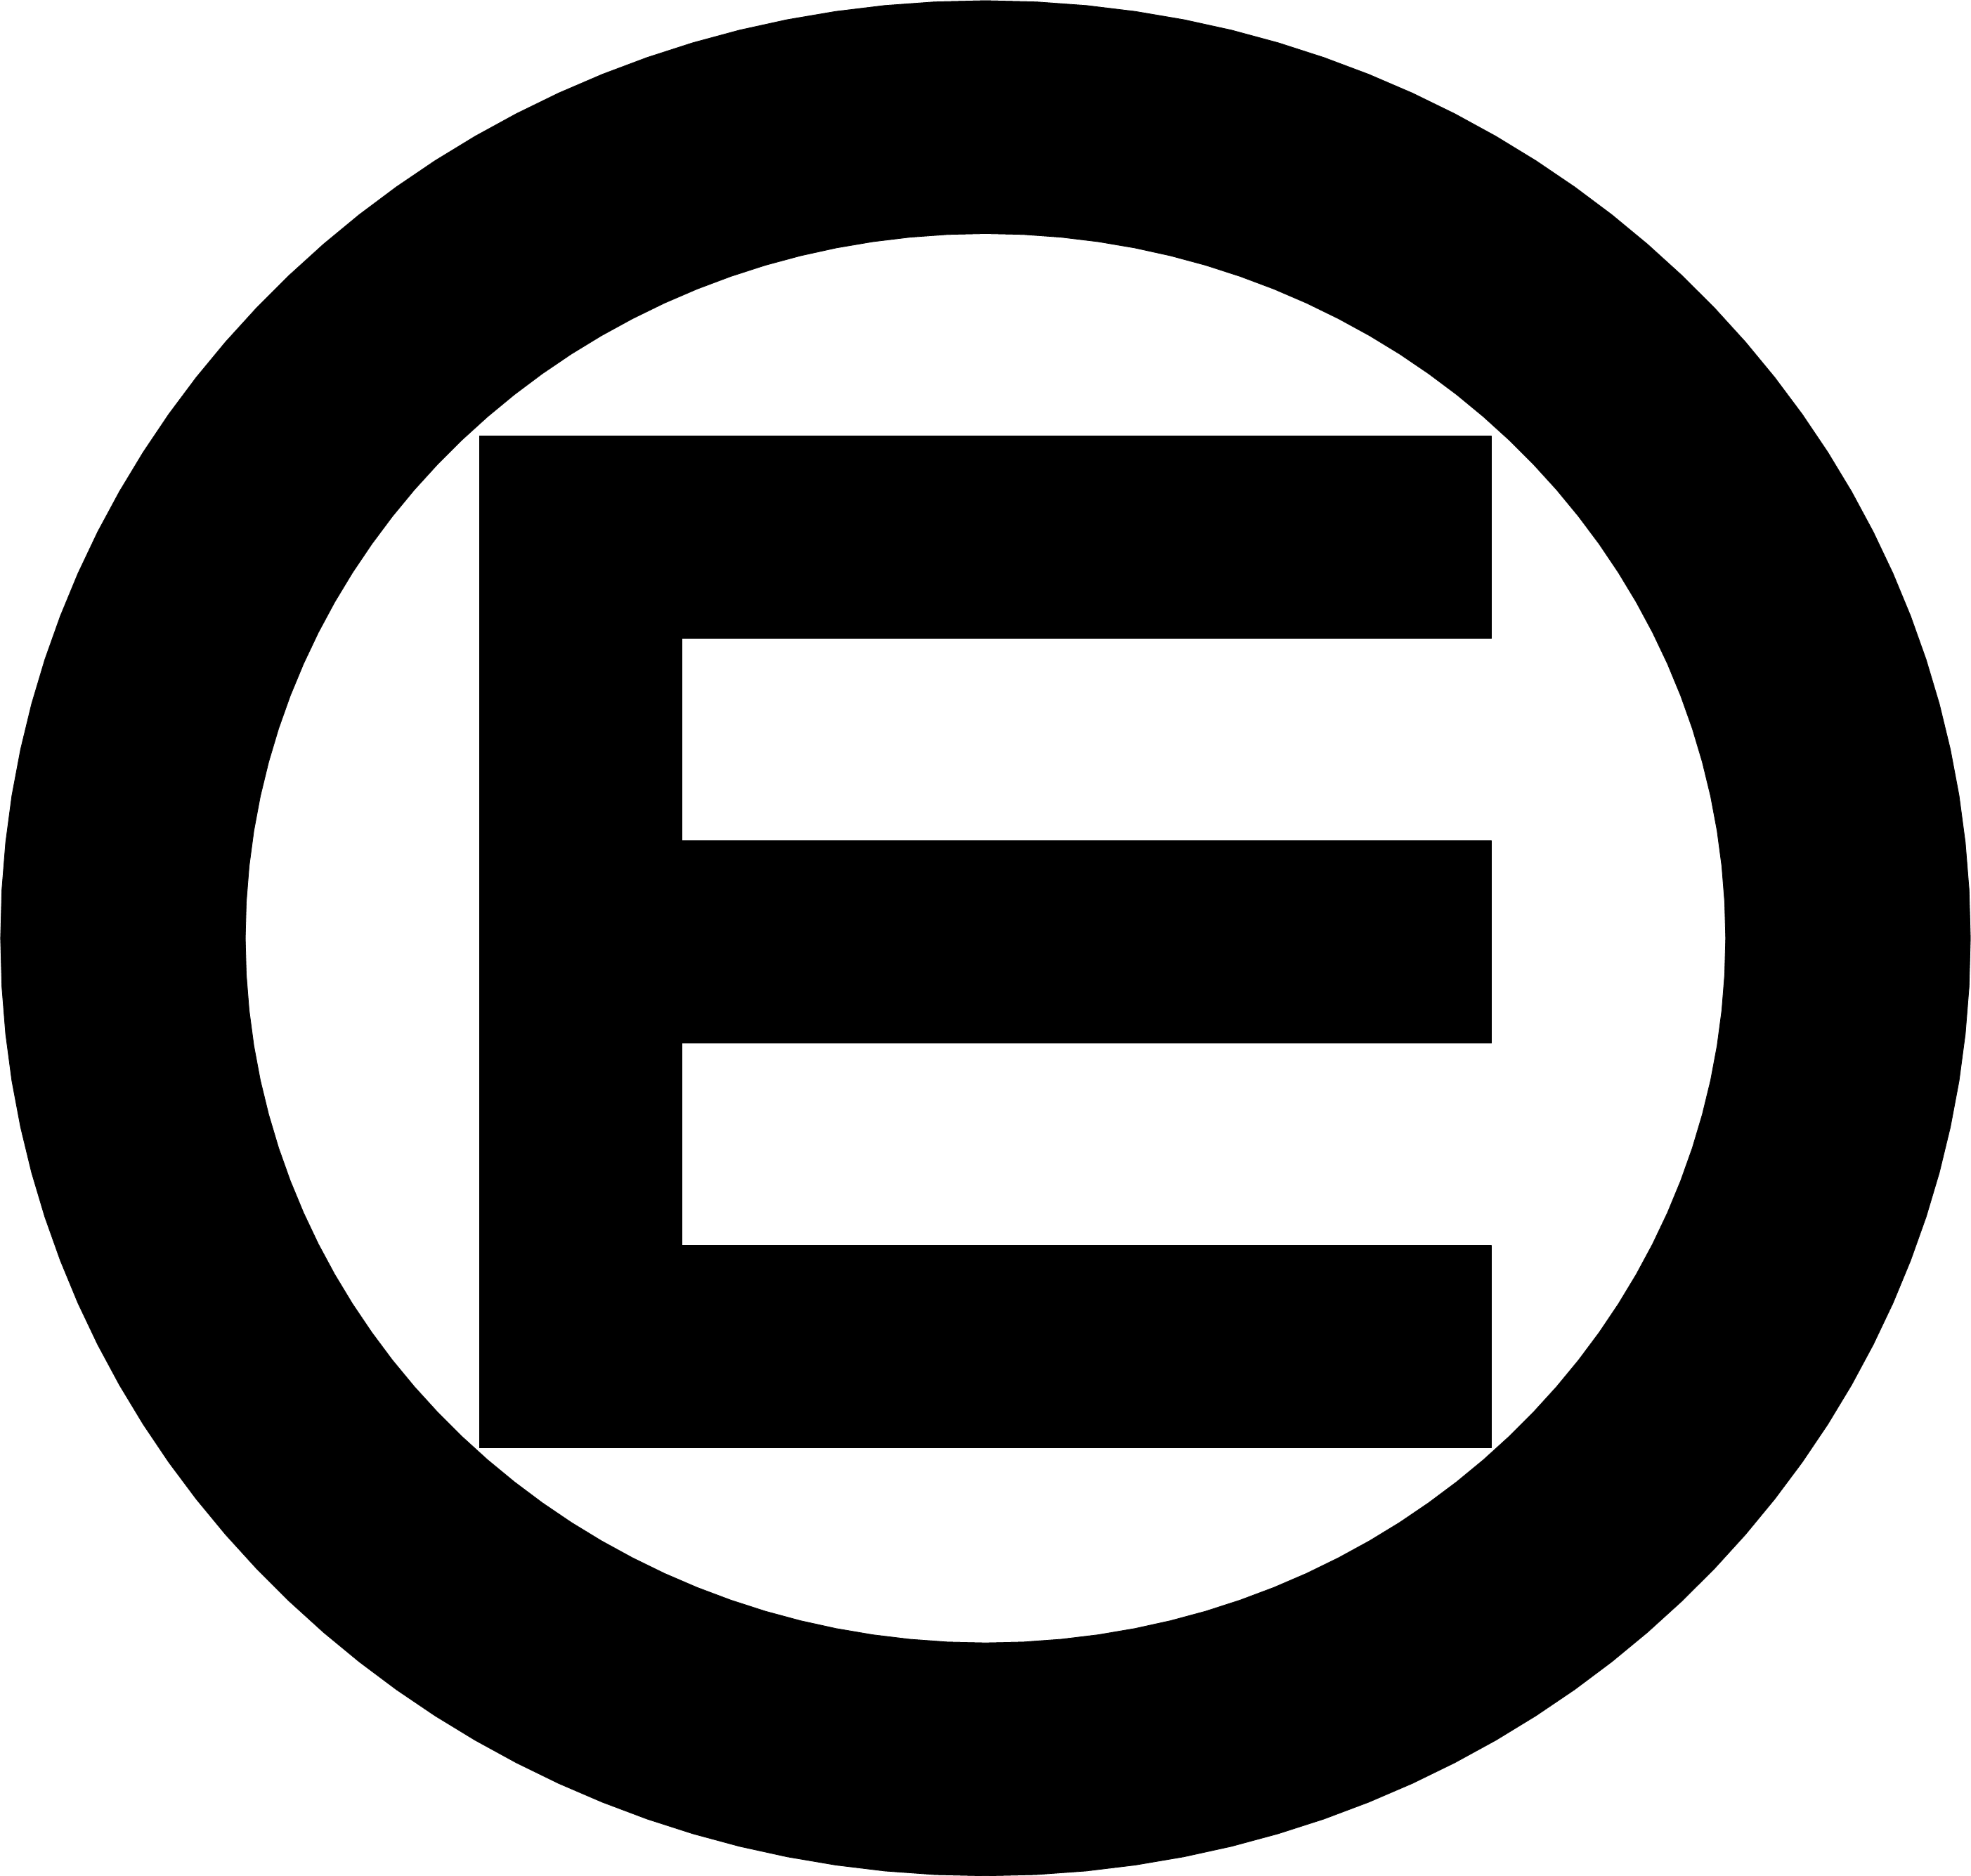 Equality Logo - File:Egalitarian and equality logo.png - Wikimedia Commons